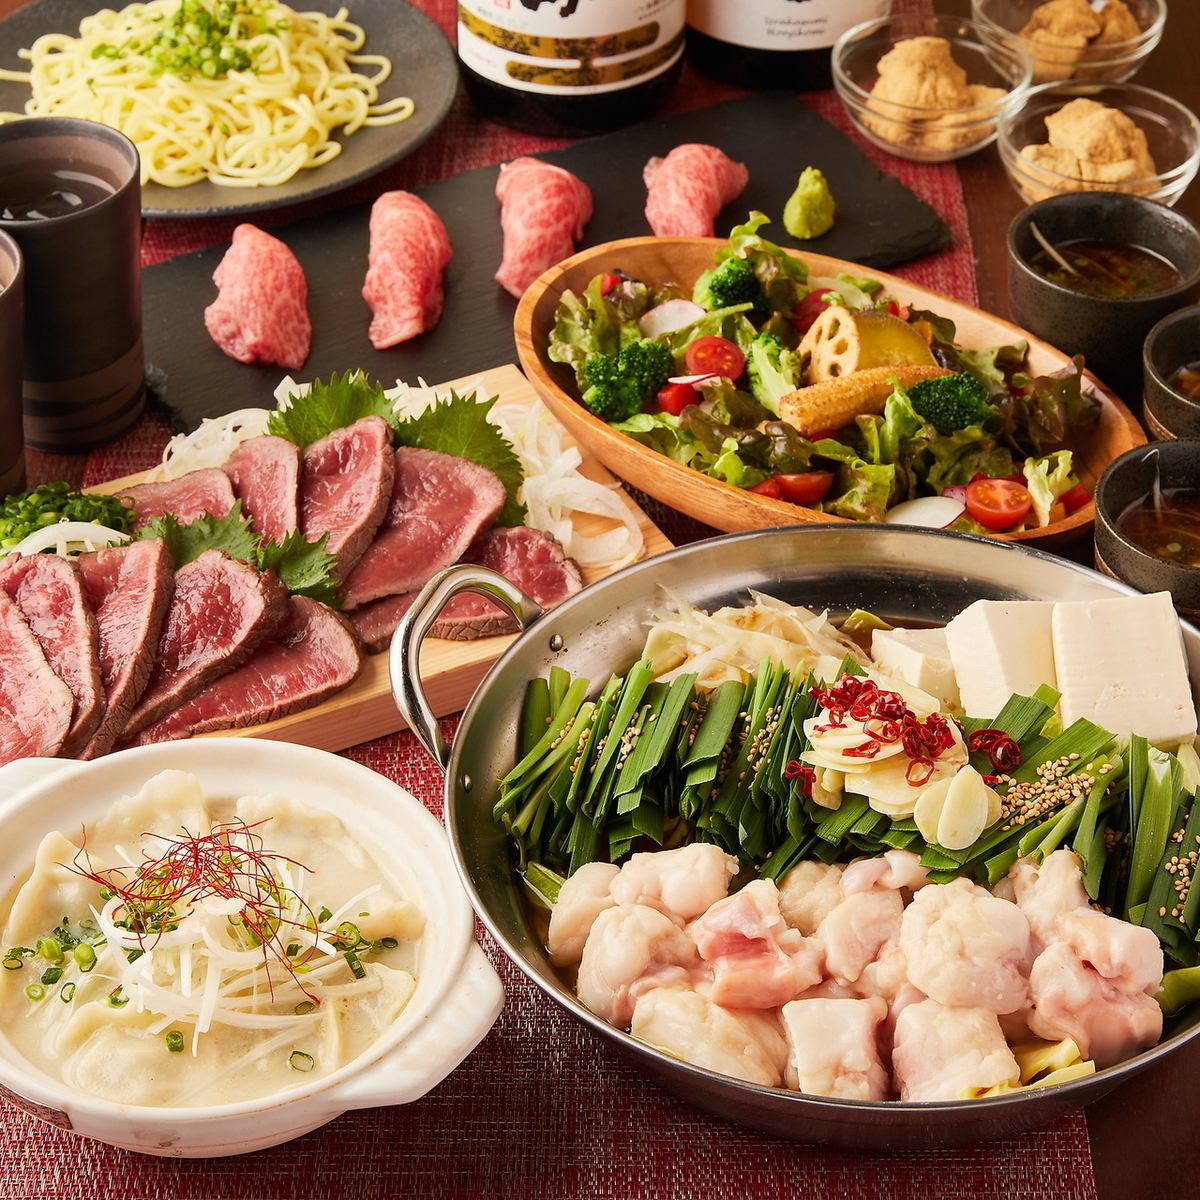 [Hakata/Kyushu gourmet food & freshly delivered seafood] 3 minutes from Yokohama Station! A neo-pub where you can enjoy freshly caught fish and Japanese cuisine!